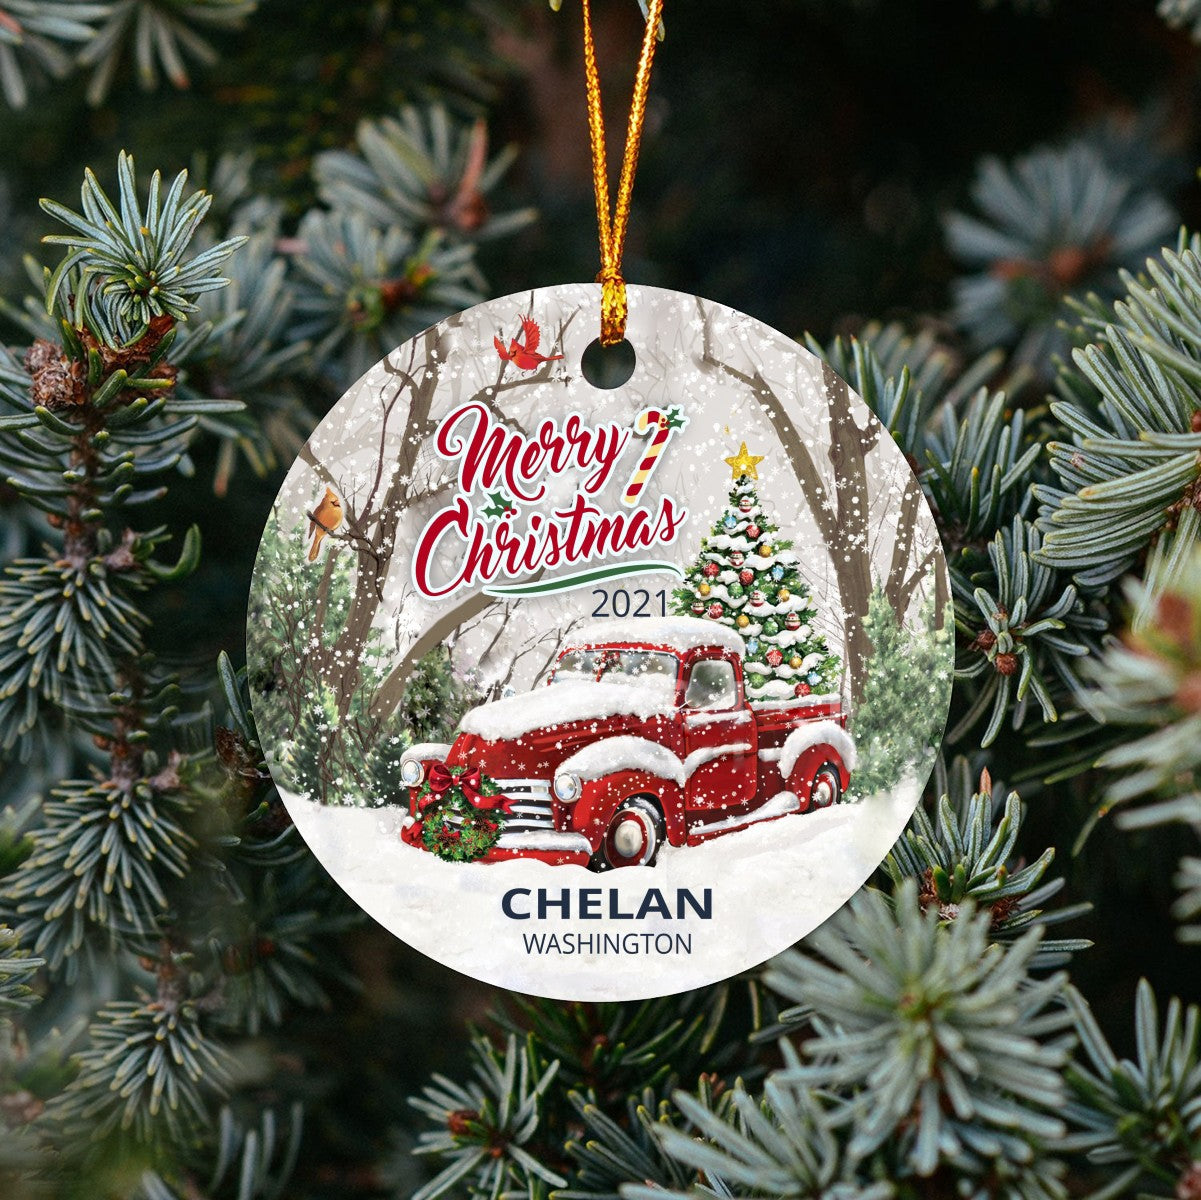 Christmas Tree Ornaments Chelan - Ornament With Name City, State Chelan Washington WA Ornament - Red Truck Xmas Ornaments 3'' Plastic Gift For Family, Friend And Housewarming